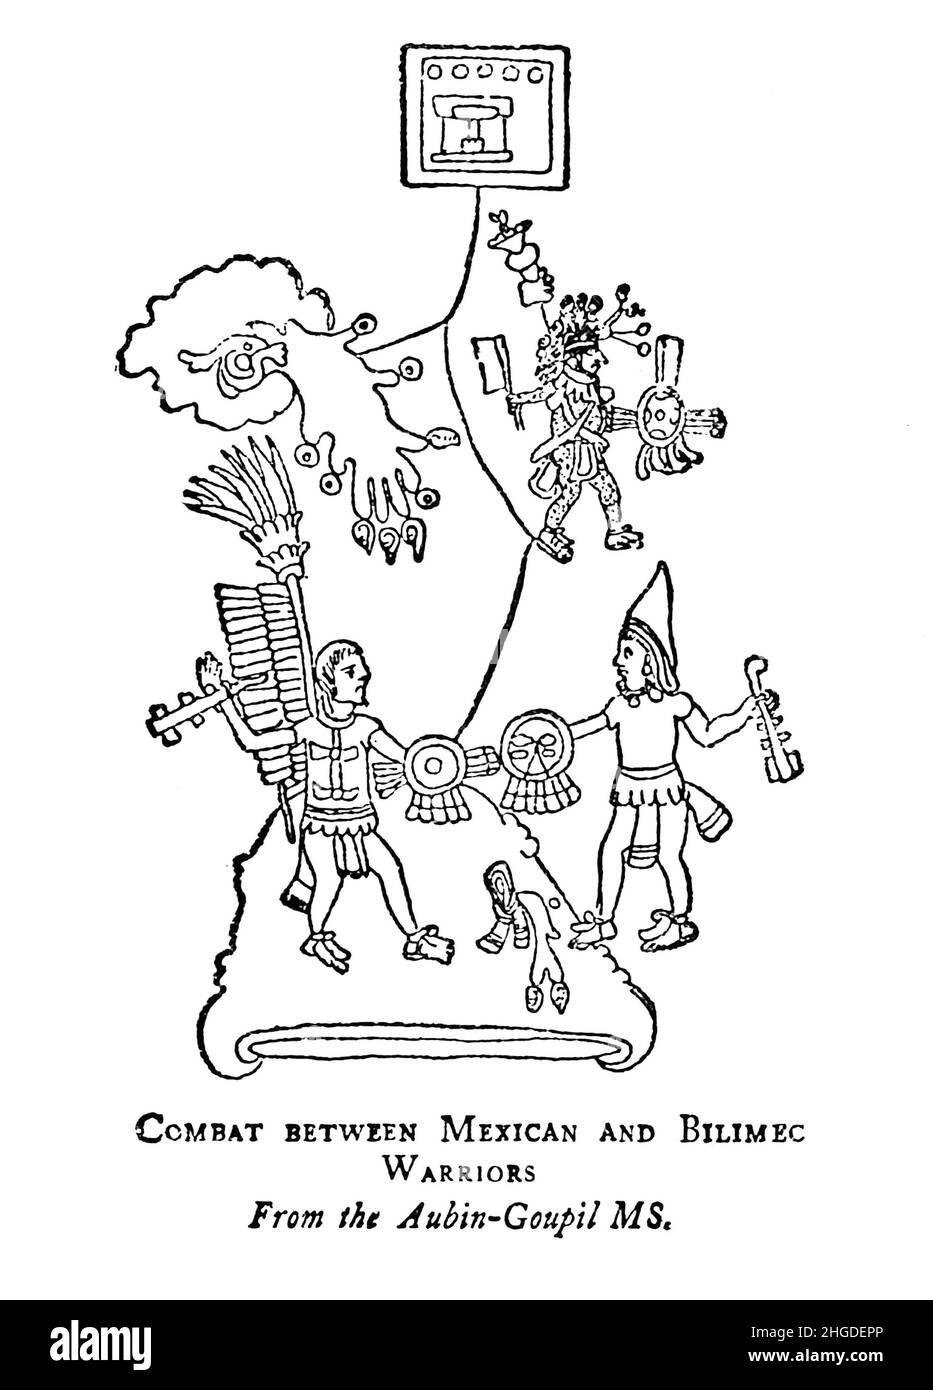 Combat between Mexican and Bilimec Warriors from the book ' Myths and Legends Mexico and Peru ' by Lewis Spence, Publisher Boston : David D. Nickerson 1915 Stock Photo